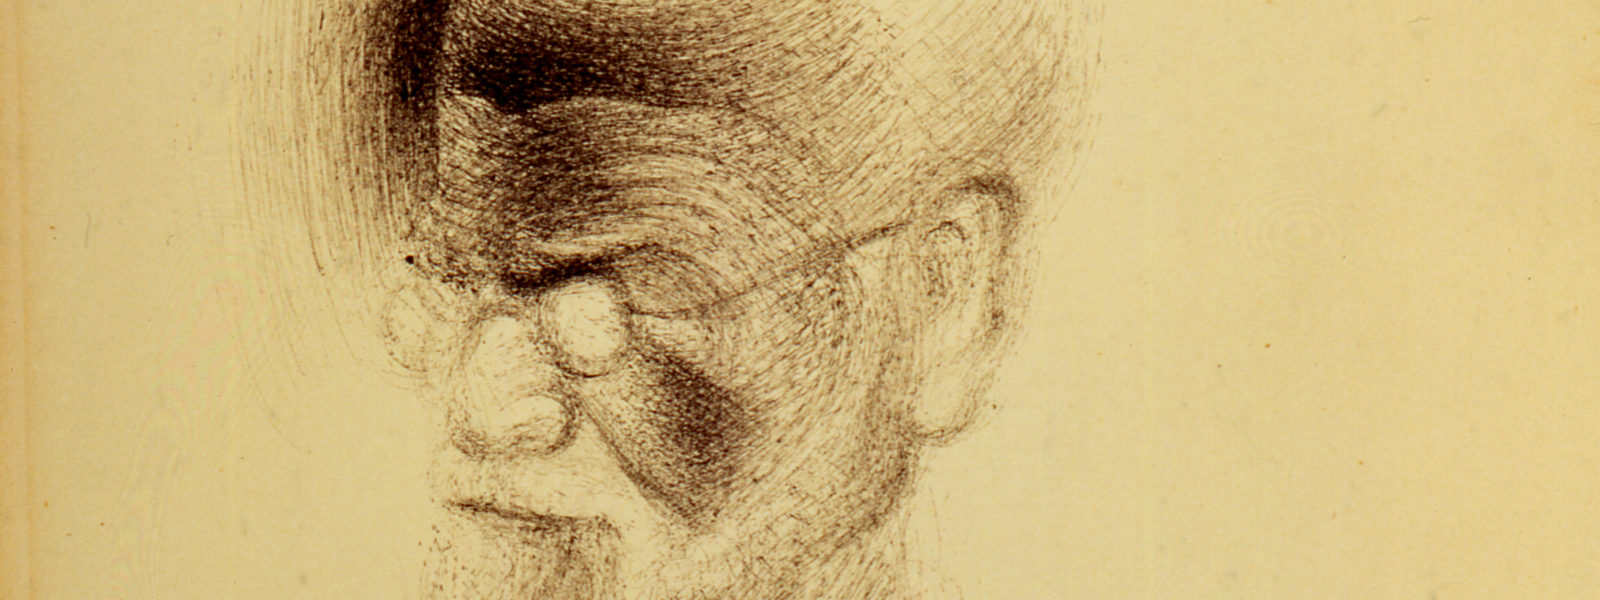 Sketching Freud: Dalí’s portraits, from life?